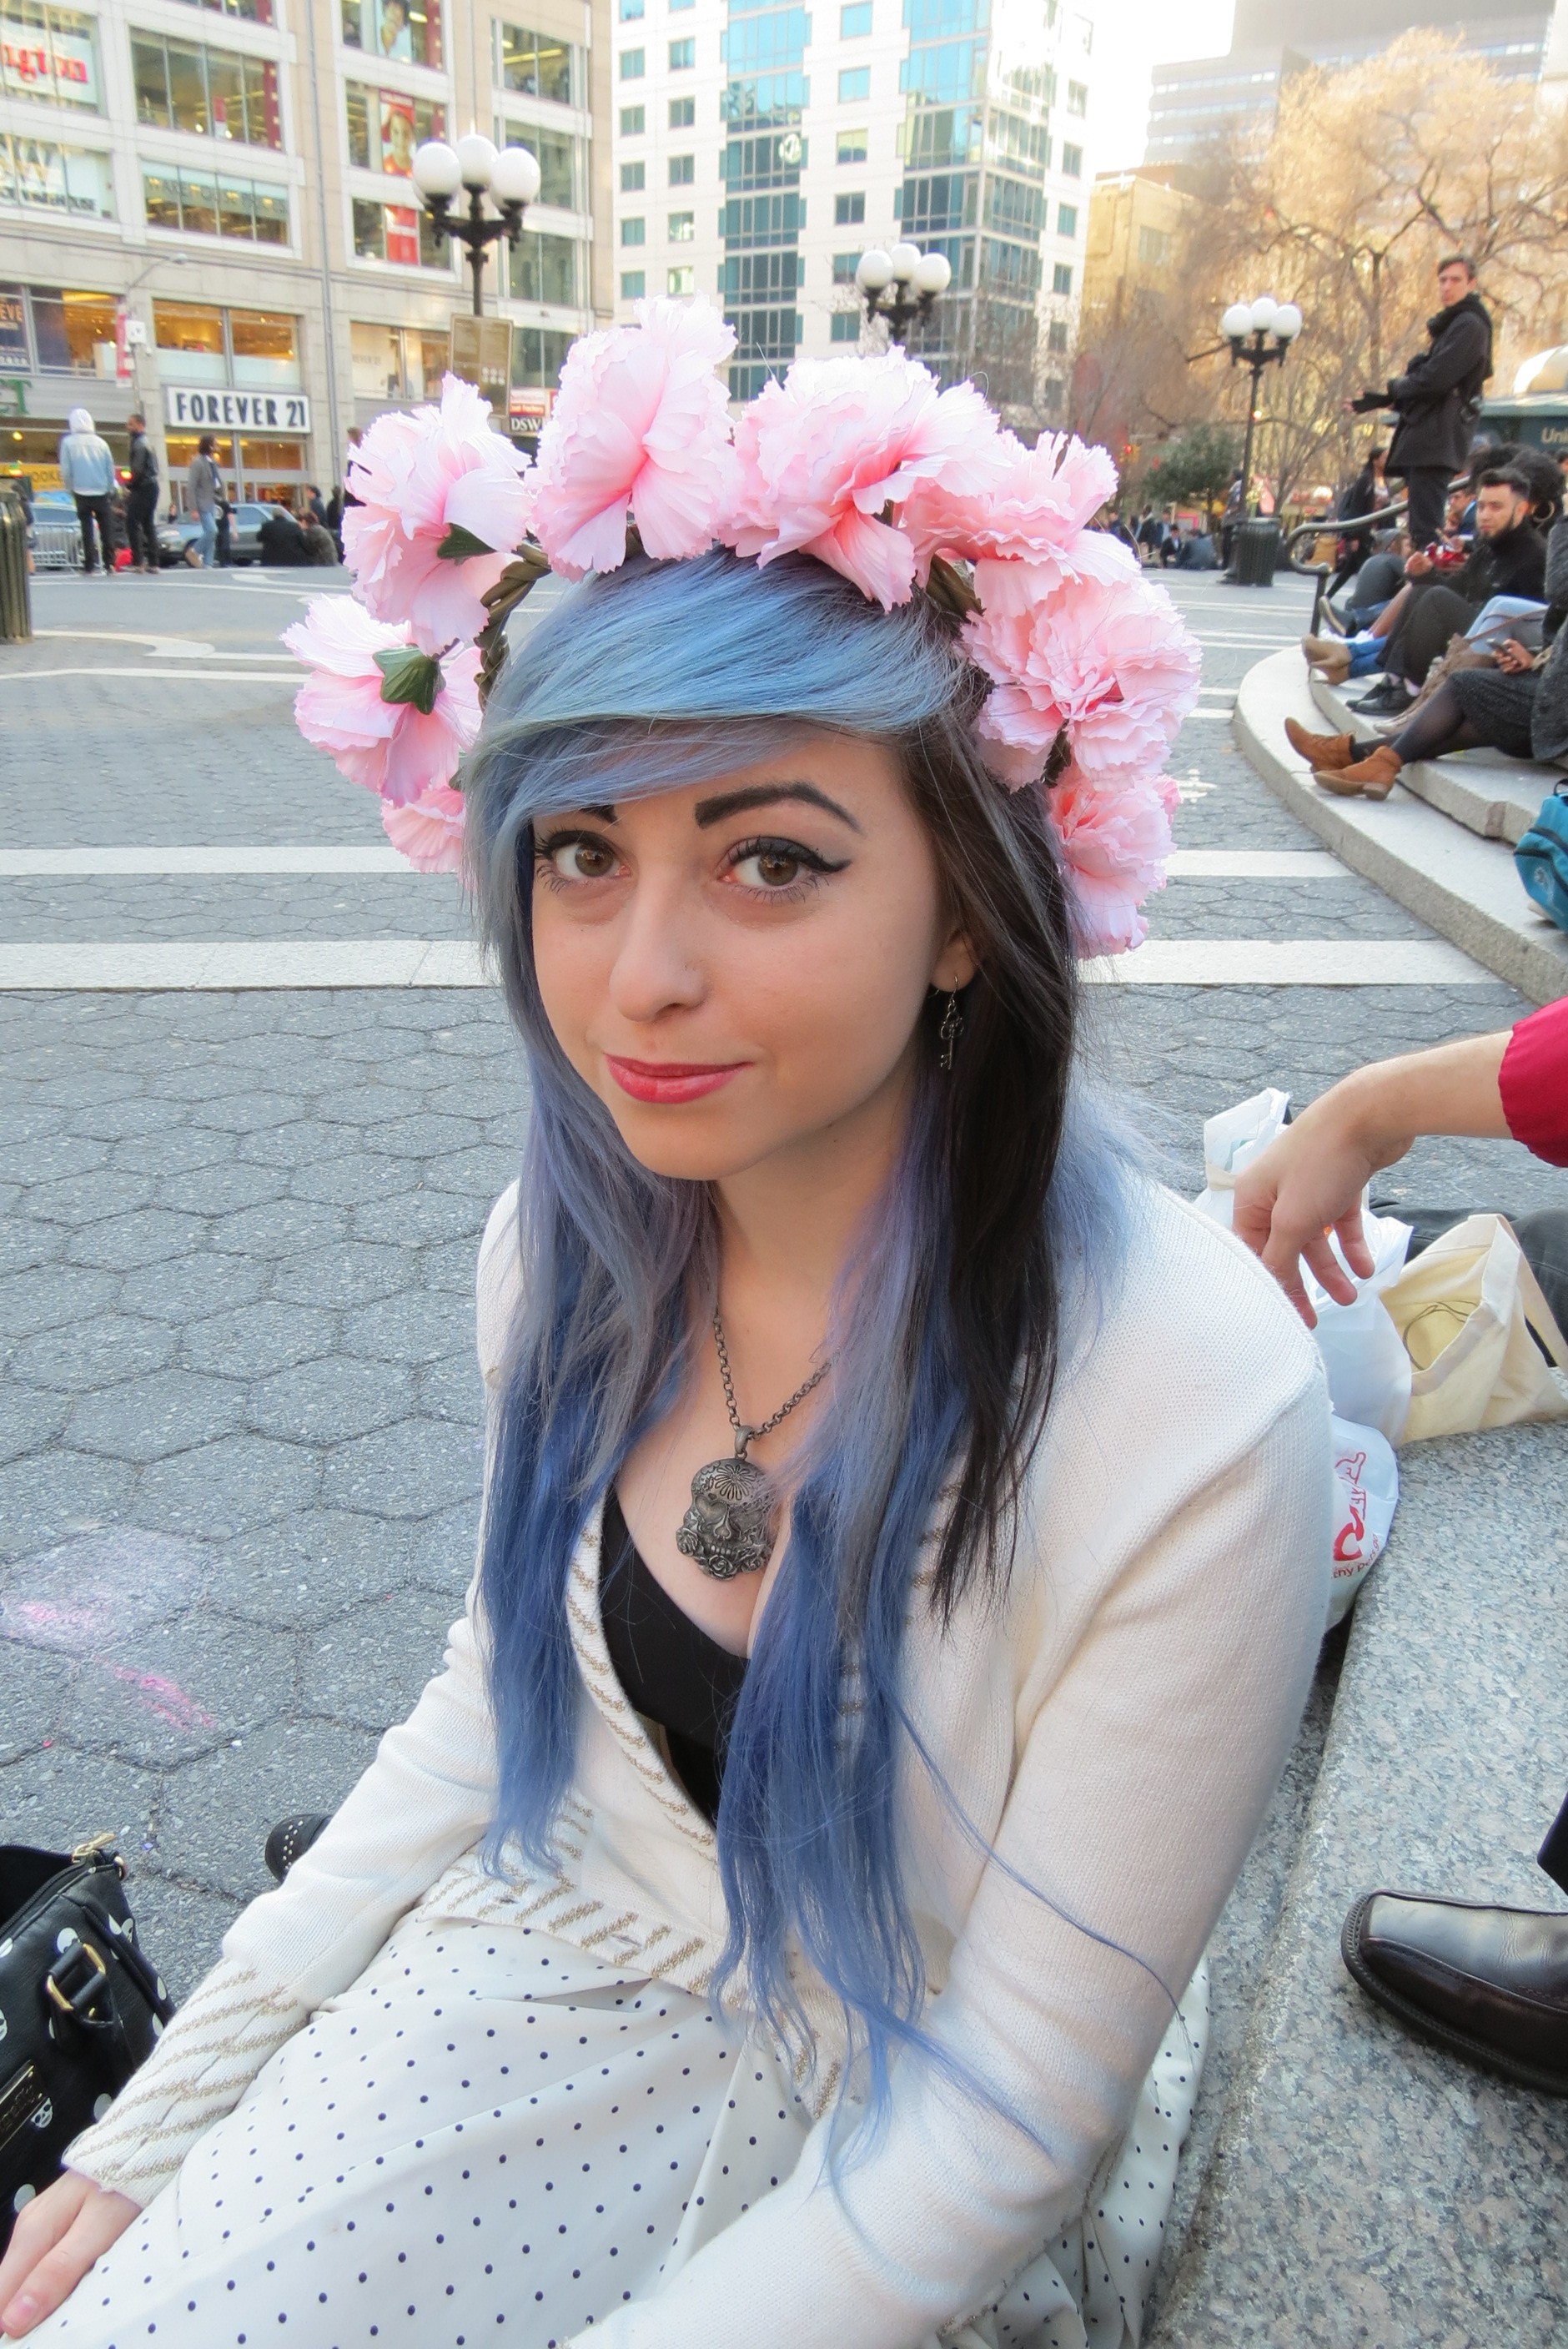 Black & blue haired girl with crown of pink flowers